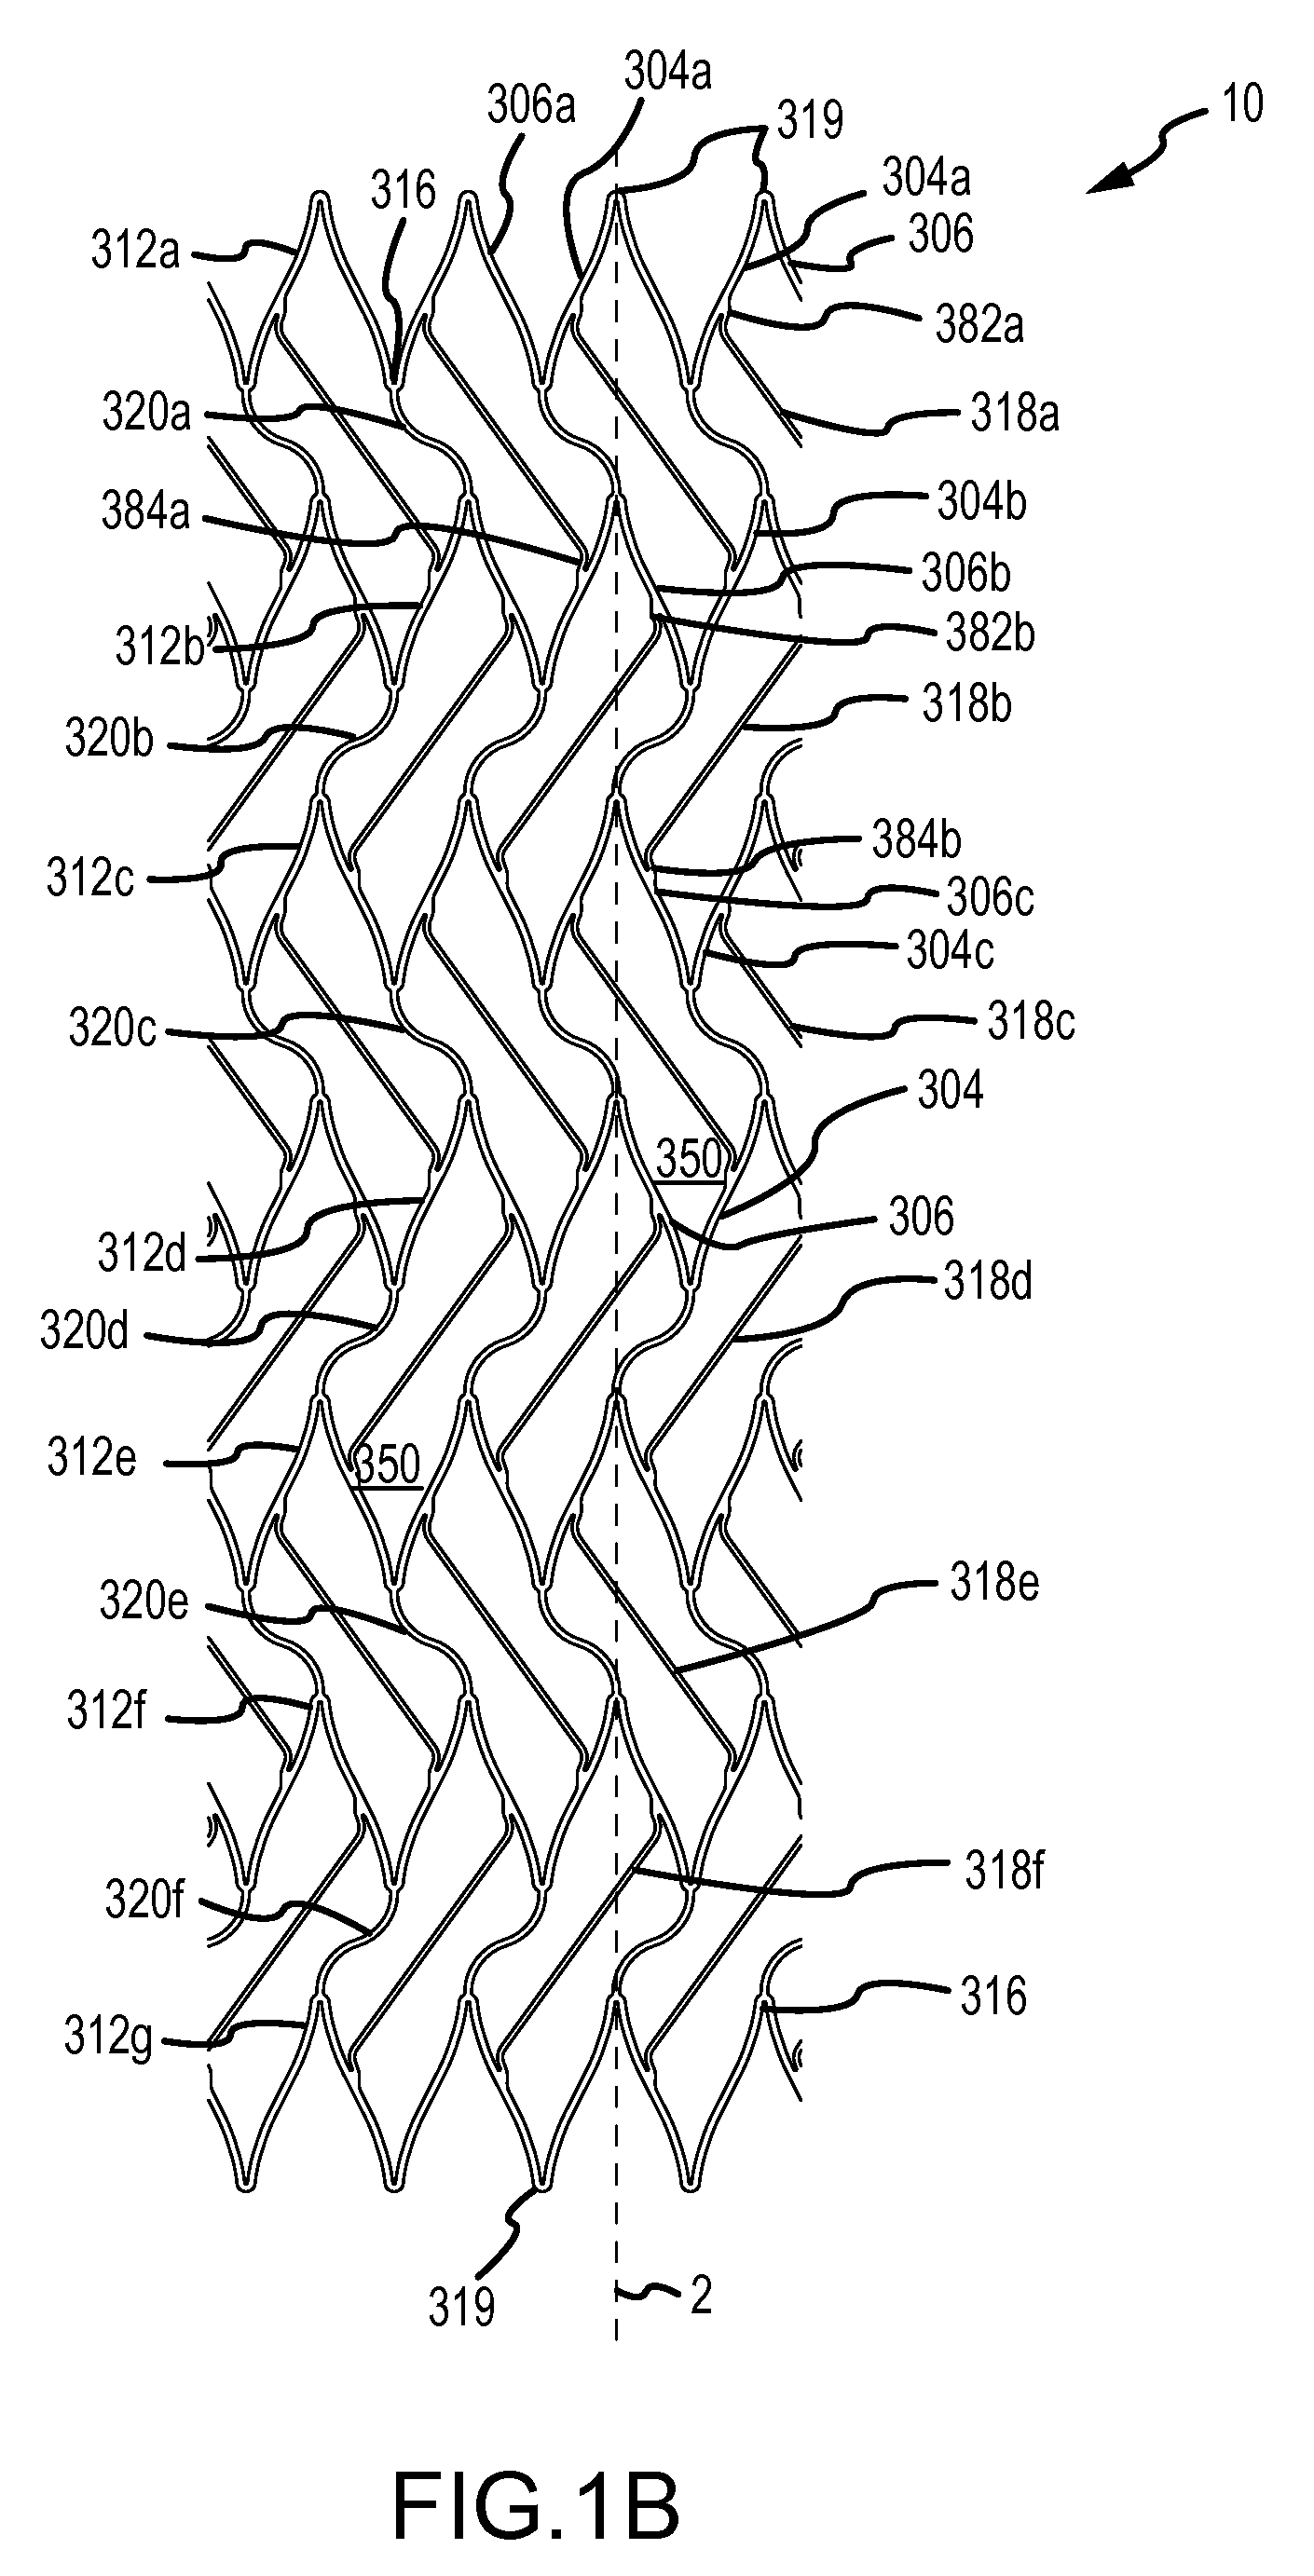 Radially Expandable Stent